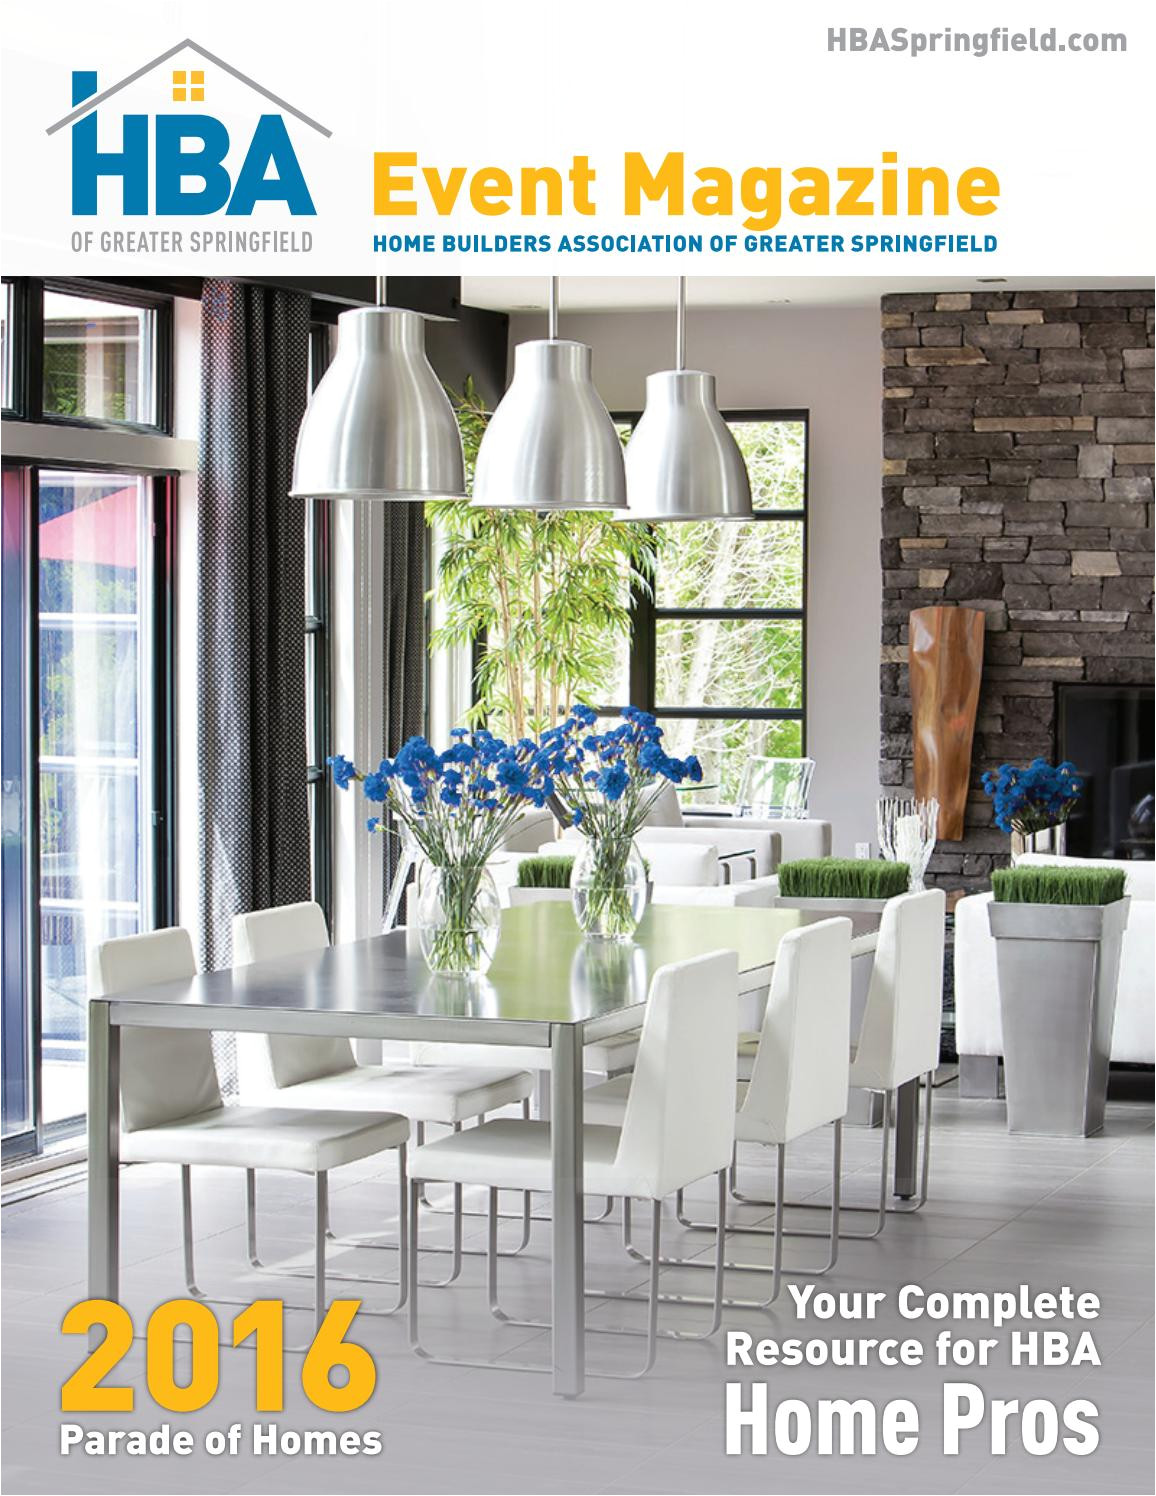 hba event magazine 2016 parade edition by home builders association of greater springfield issuu